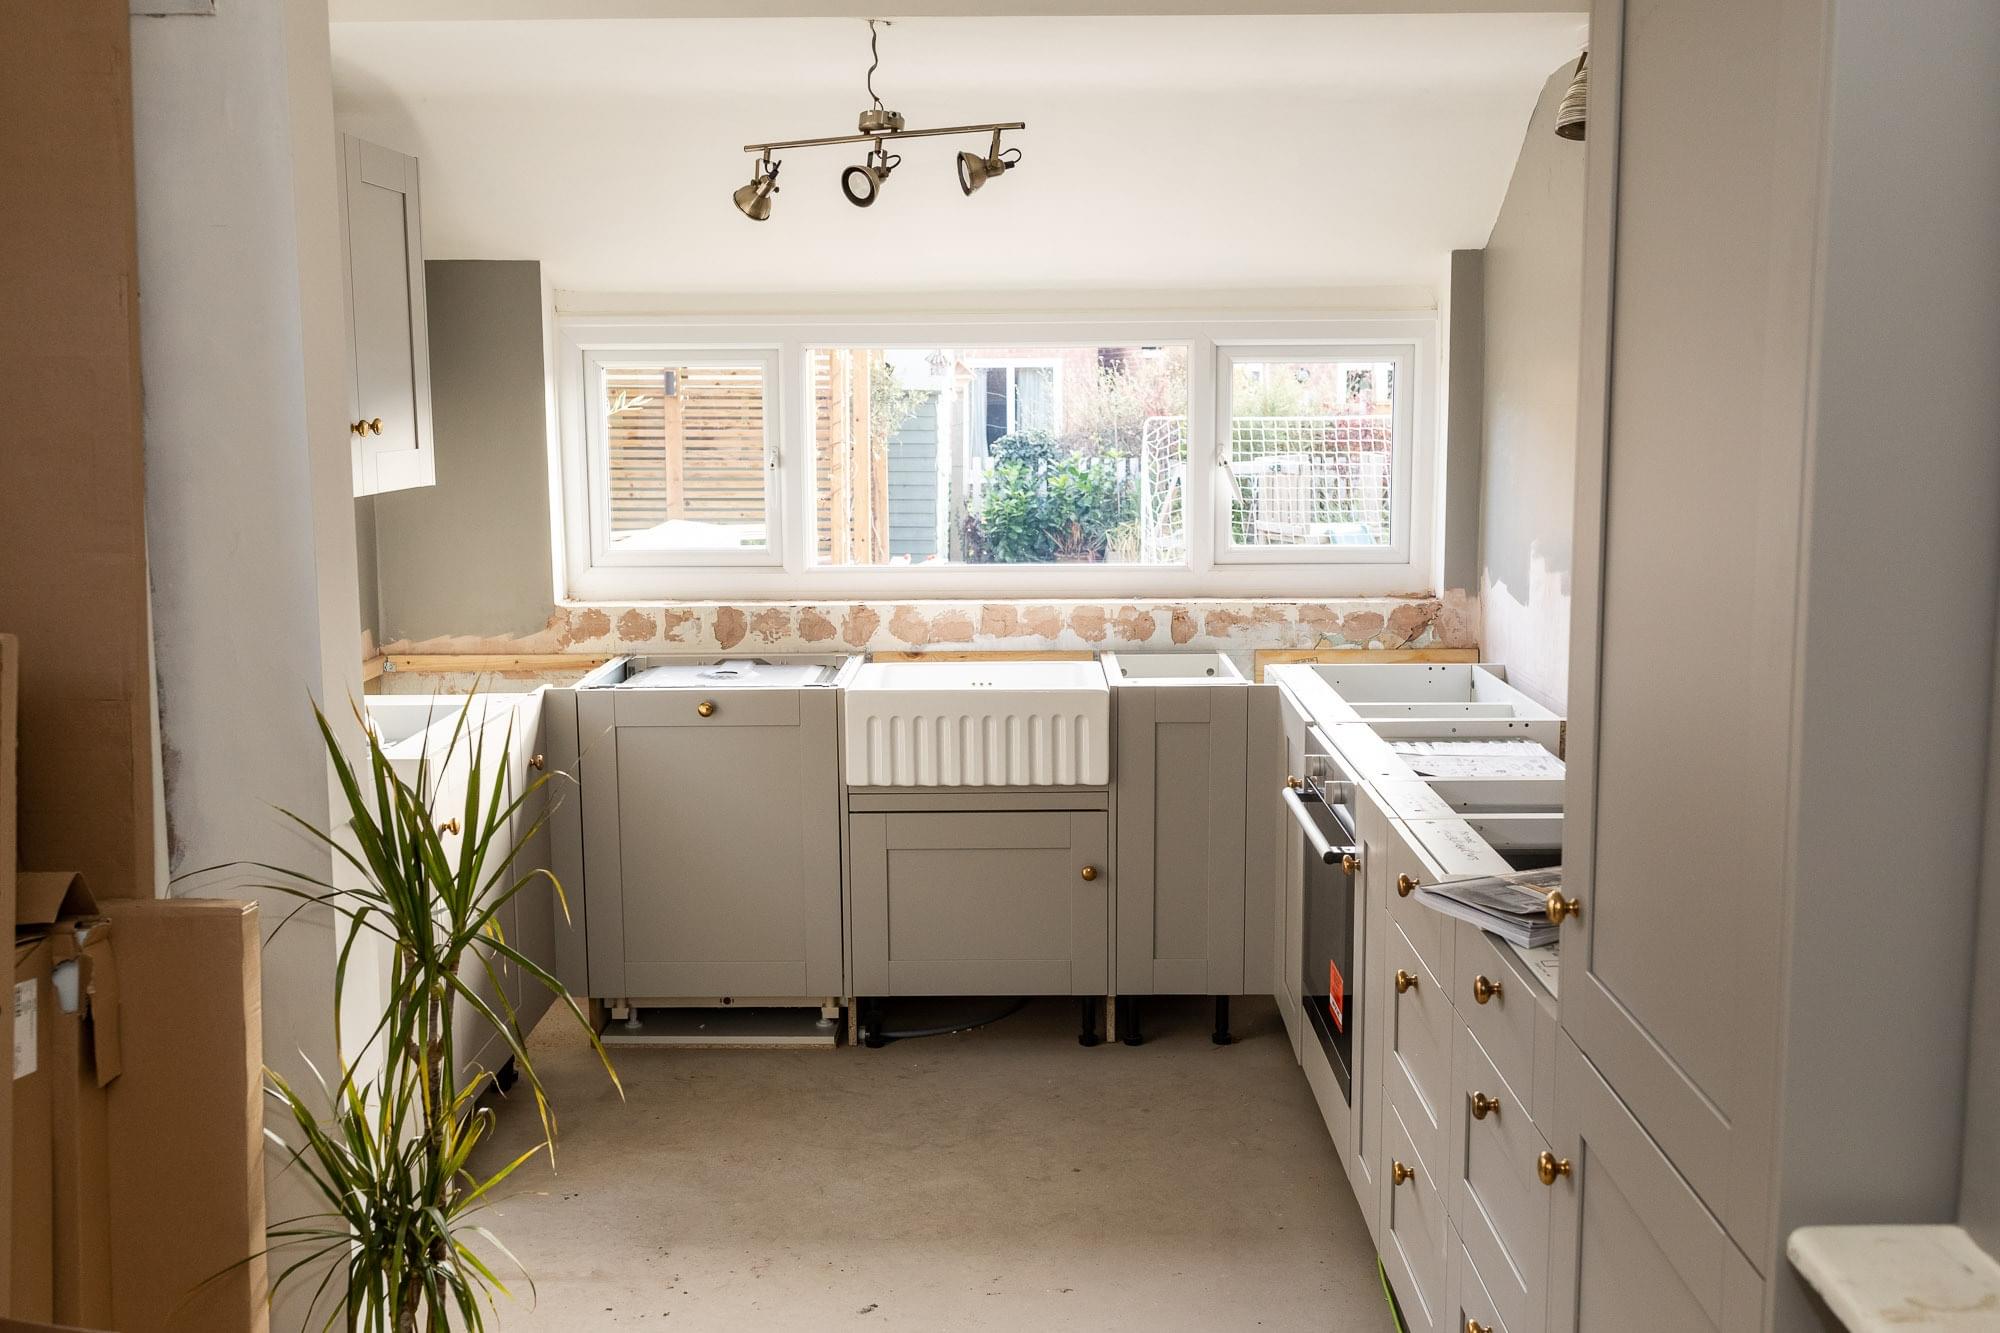 How to survive without worktops